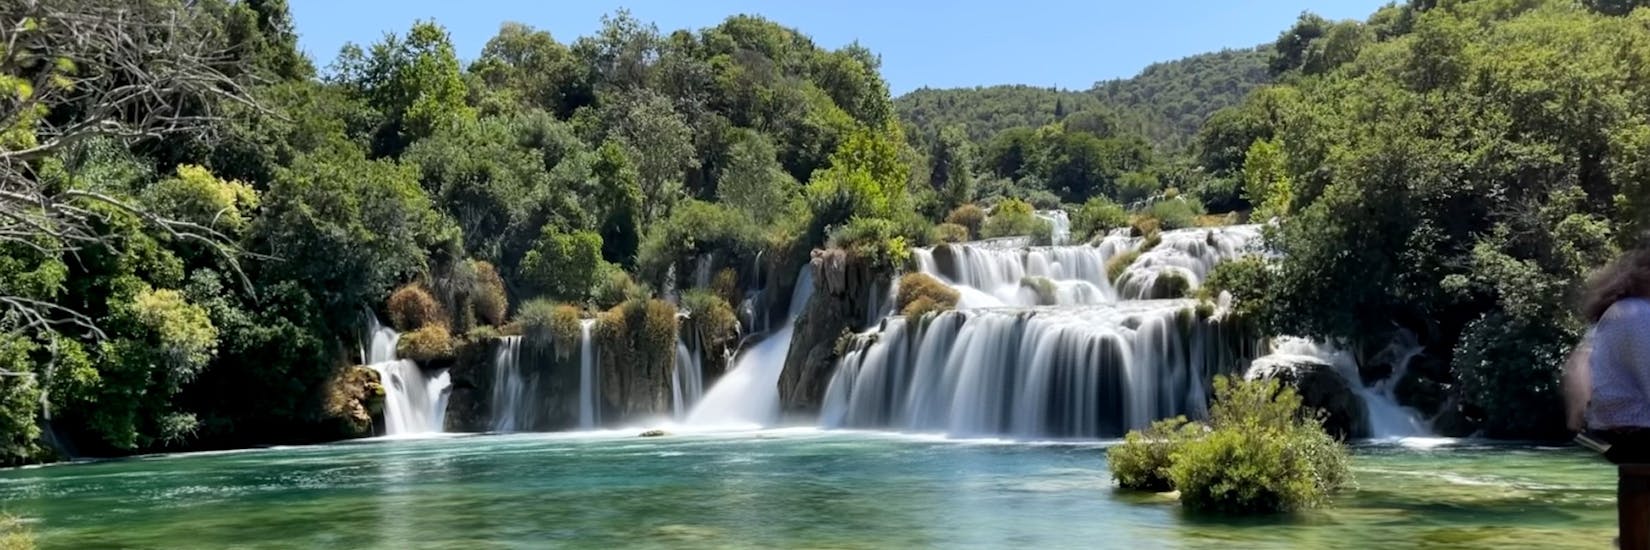 The famous Skradinski Buk falls which you can see during the Boat Trip to the Krka National Park from Šibenik with Anima Natura Šibenik.